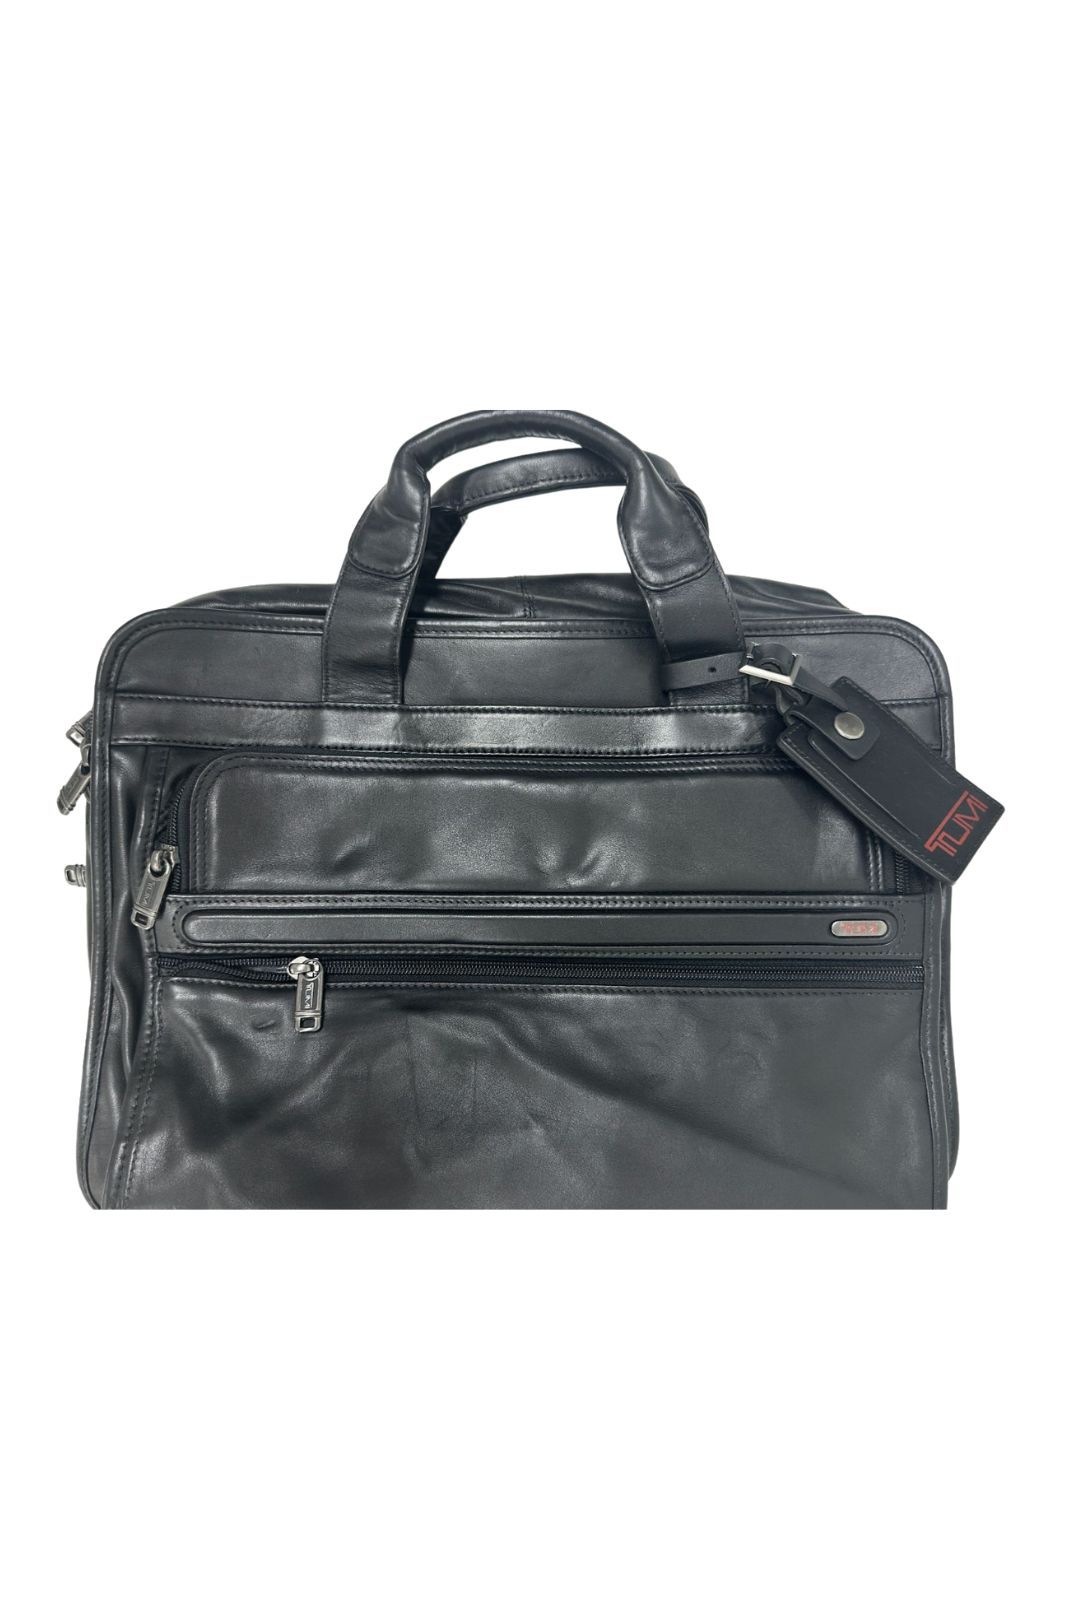 Tumi Full Leather Briefcase/Travel Bag in Black